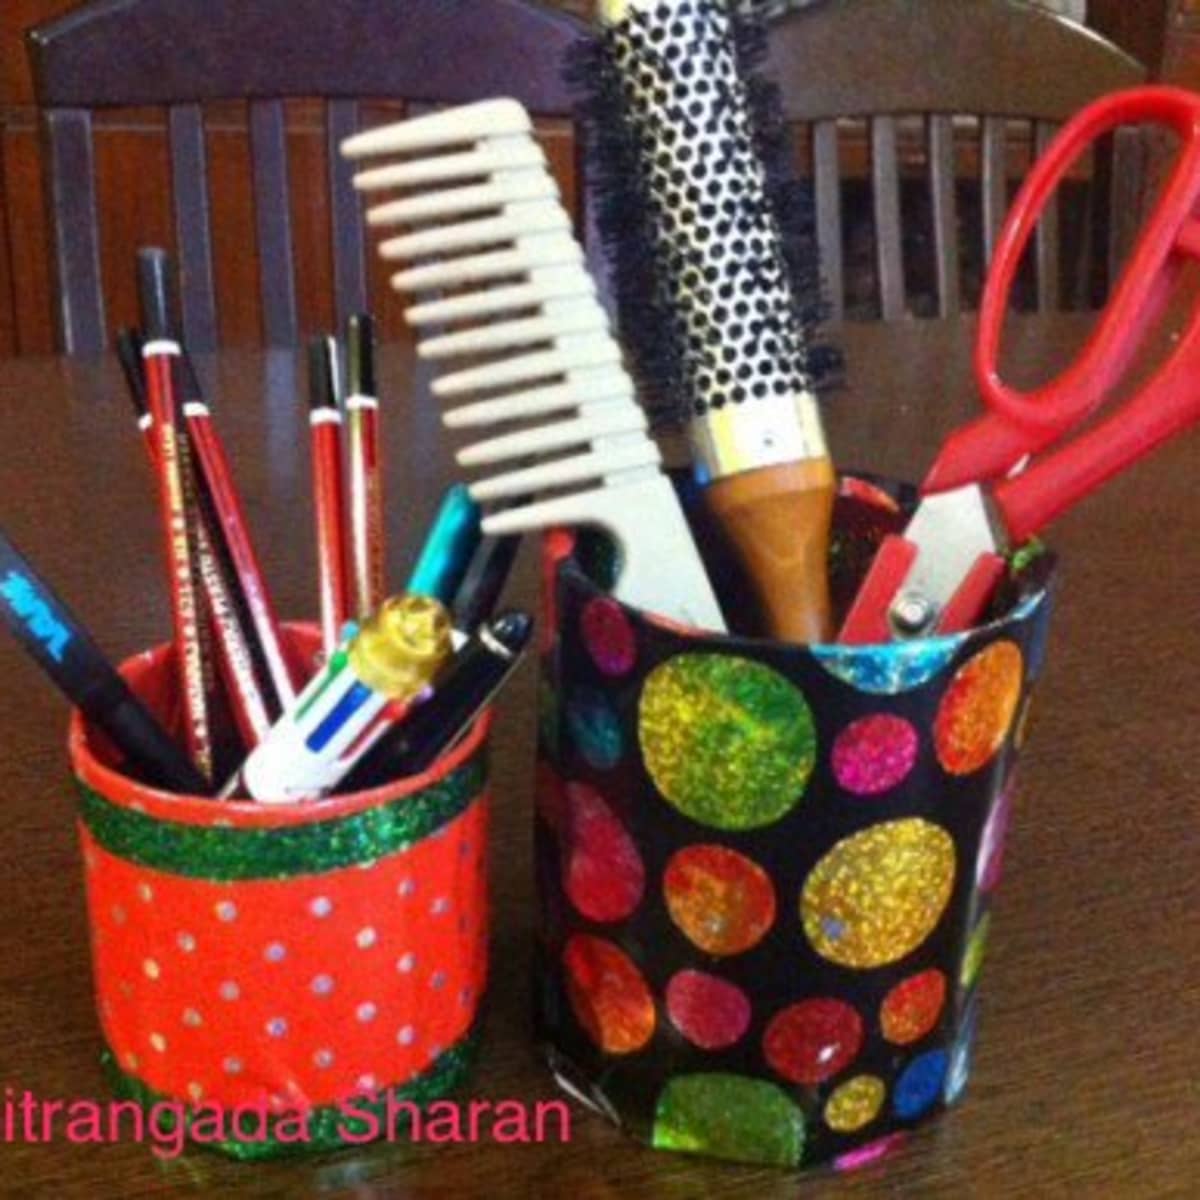 Cardboard crafts // How to make a pencil case and organizer out of  cardboard 